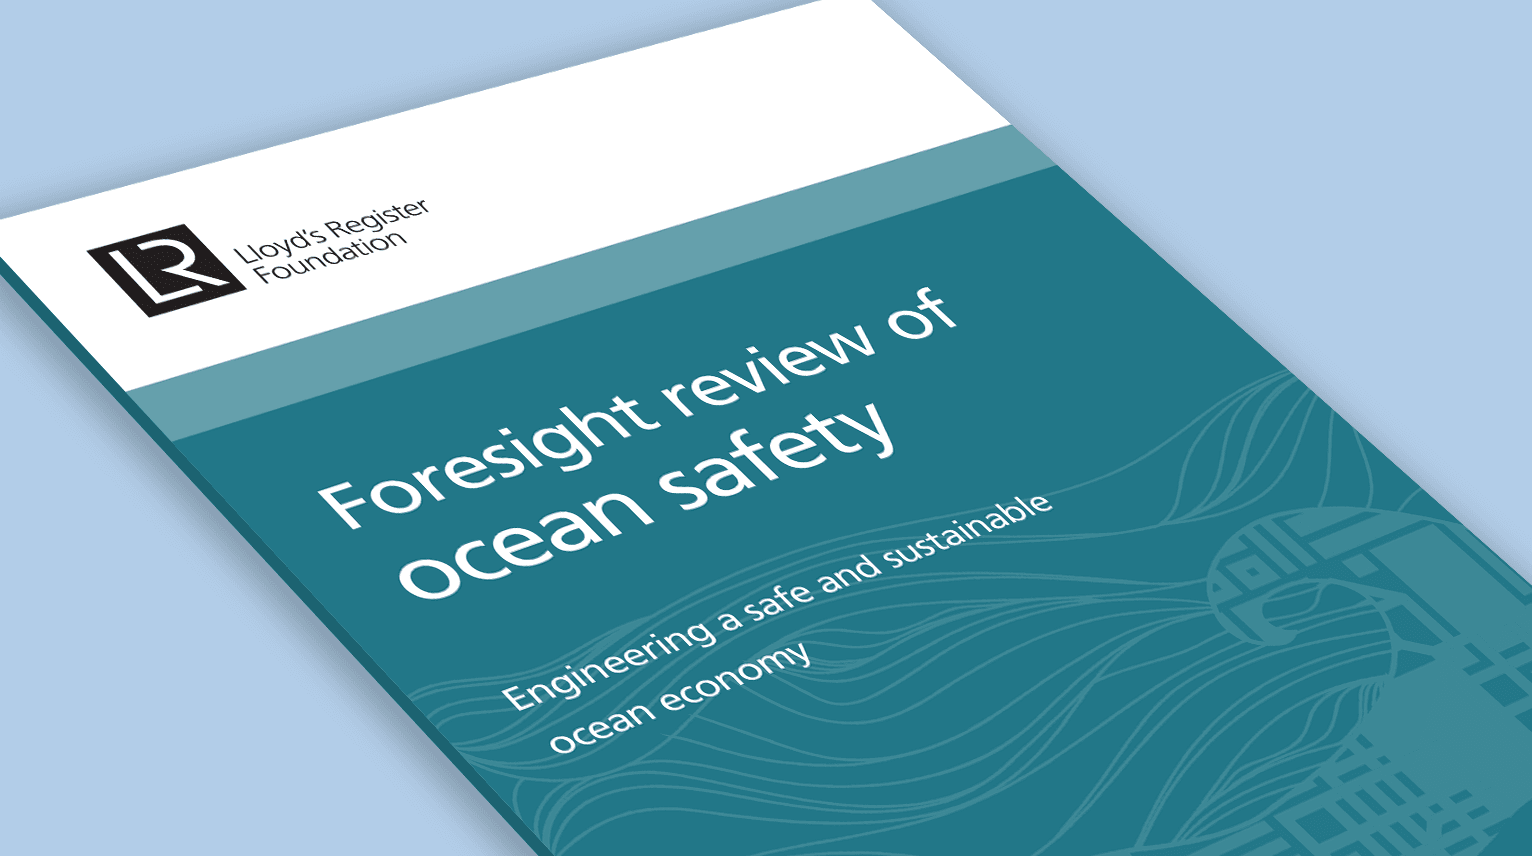 Foresight Review on Ocean Safety